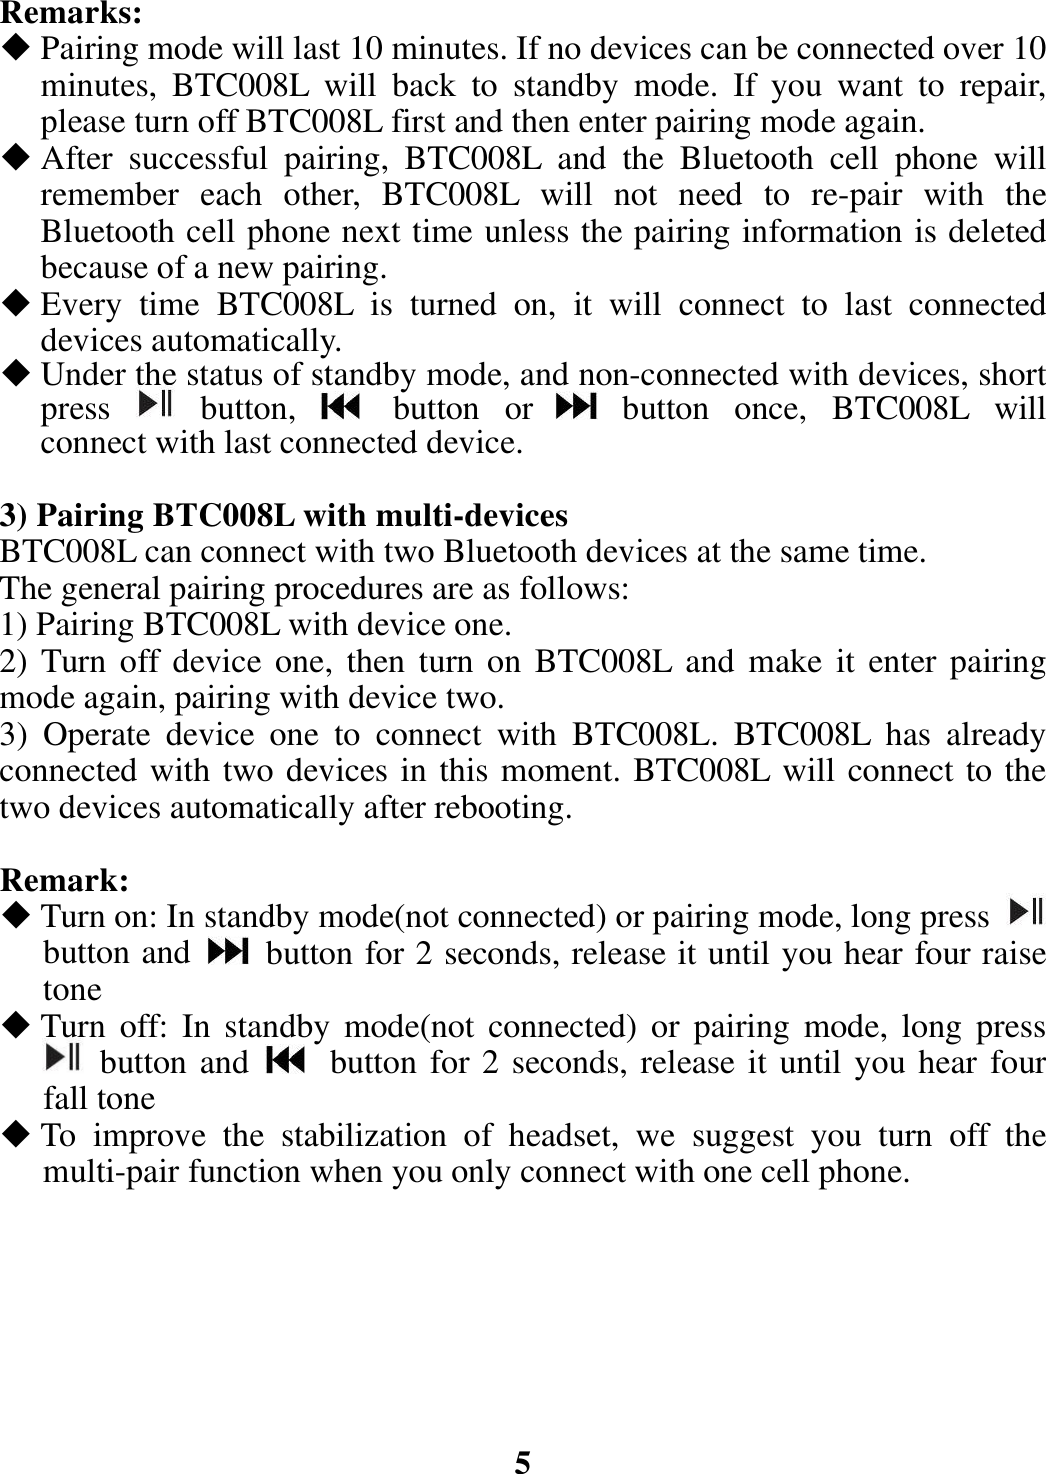 Remarks:  Pairing mode will last 10 minutes. If no devices can be connected over 10 minutes, BTC008L will back to standby mode. If you want to repair, please turn off BTC008L first and then enter pairing mode again.  After successful pairing, BTC008L and the Bluetooth cell phone will remember each other, BTC008L will not need to re-pair with the Bluetooth cell phone next time unless the pairing information is deleted because of a new pairing.  Every time BTC008L is turned on, it will connect to last connected devices automatically.    Under the status of standby mode, and non-connected with devices, short press   button,   button or  button once, BTC008L will connect with last connected device.  3) Pairing BTC008L with multi-devices BTC008L can connect with two Bluetooth devices at the same time.   The general pairing procedures are as follows: 1) Pairing BTC008L with device one. 2) Turn off device one, then turn on BTC008L and make it enter pairing mode again, pairing with device two. 3) Operate device one to connect with BTC008L. BTC008L has already connected with two devices in this moment. BTC008L will connect to the two devices automatically after rebooting.  Remark:  Turn on: In standby mode(not connected) or pairing mode, long press   button and    button for 2 seconds, release it until you hear four raise tone  Turn off: In standby mode(not connected) or pairing mode, long press  button and   button for 2 seconds, release it until you hear four fall tone  To improve the stabilization of headset, we suggest you turn off the multi-pair function when you only connect with one cell phone.        5 